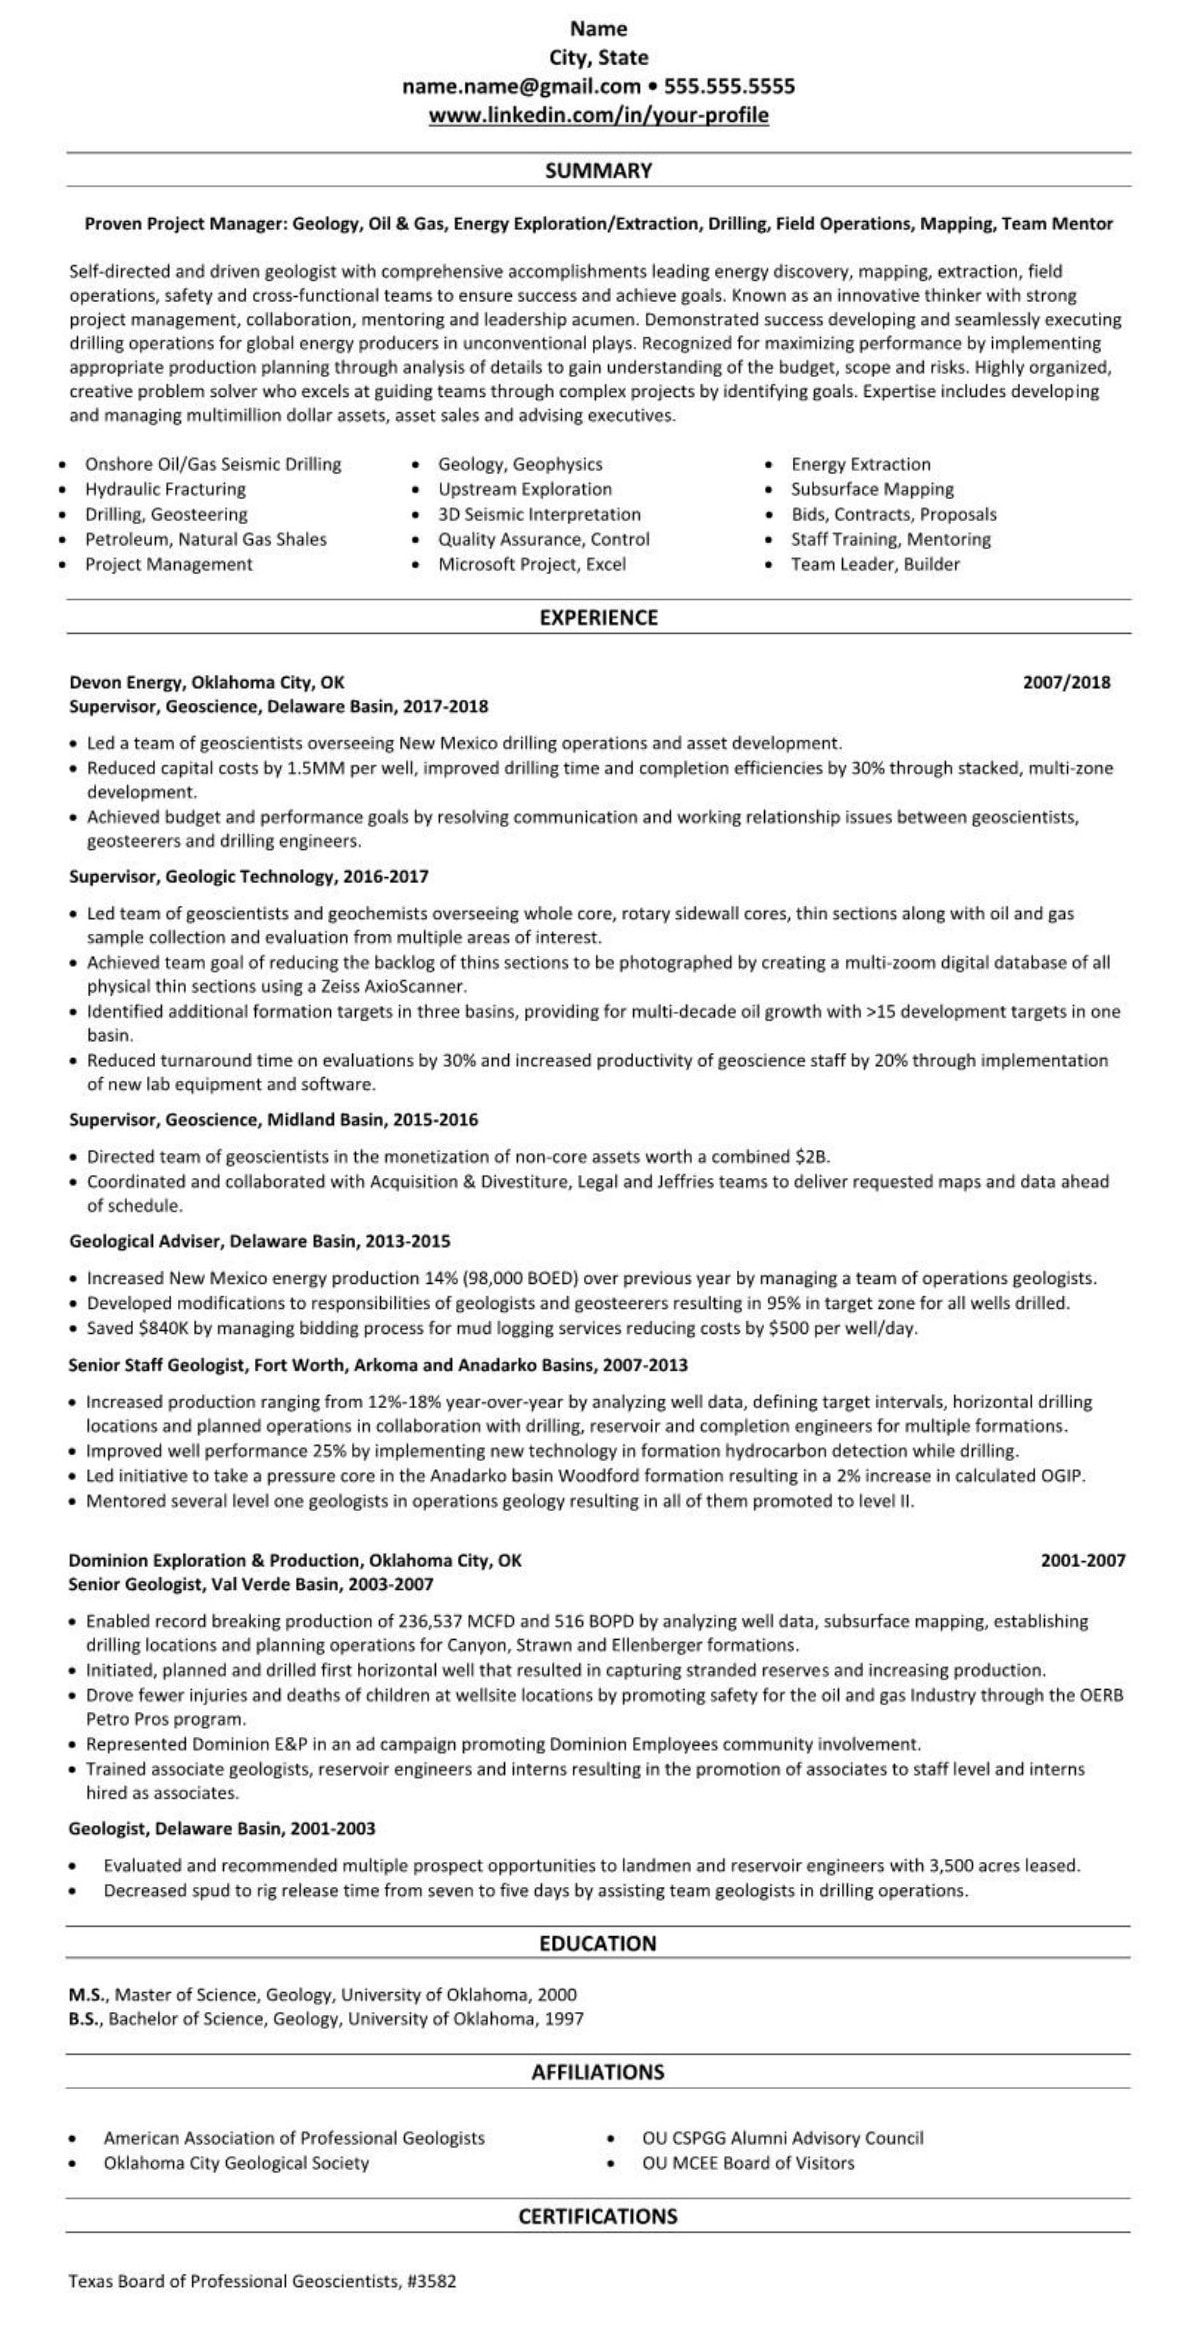 professional executive resume example oil energy drilling 2154